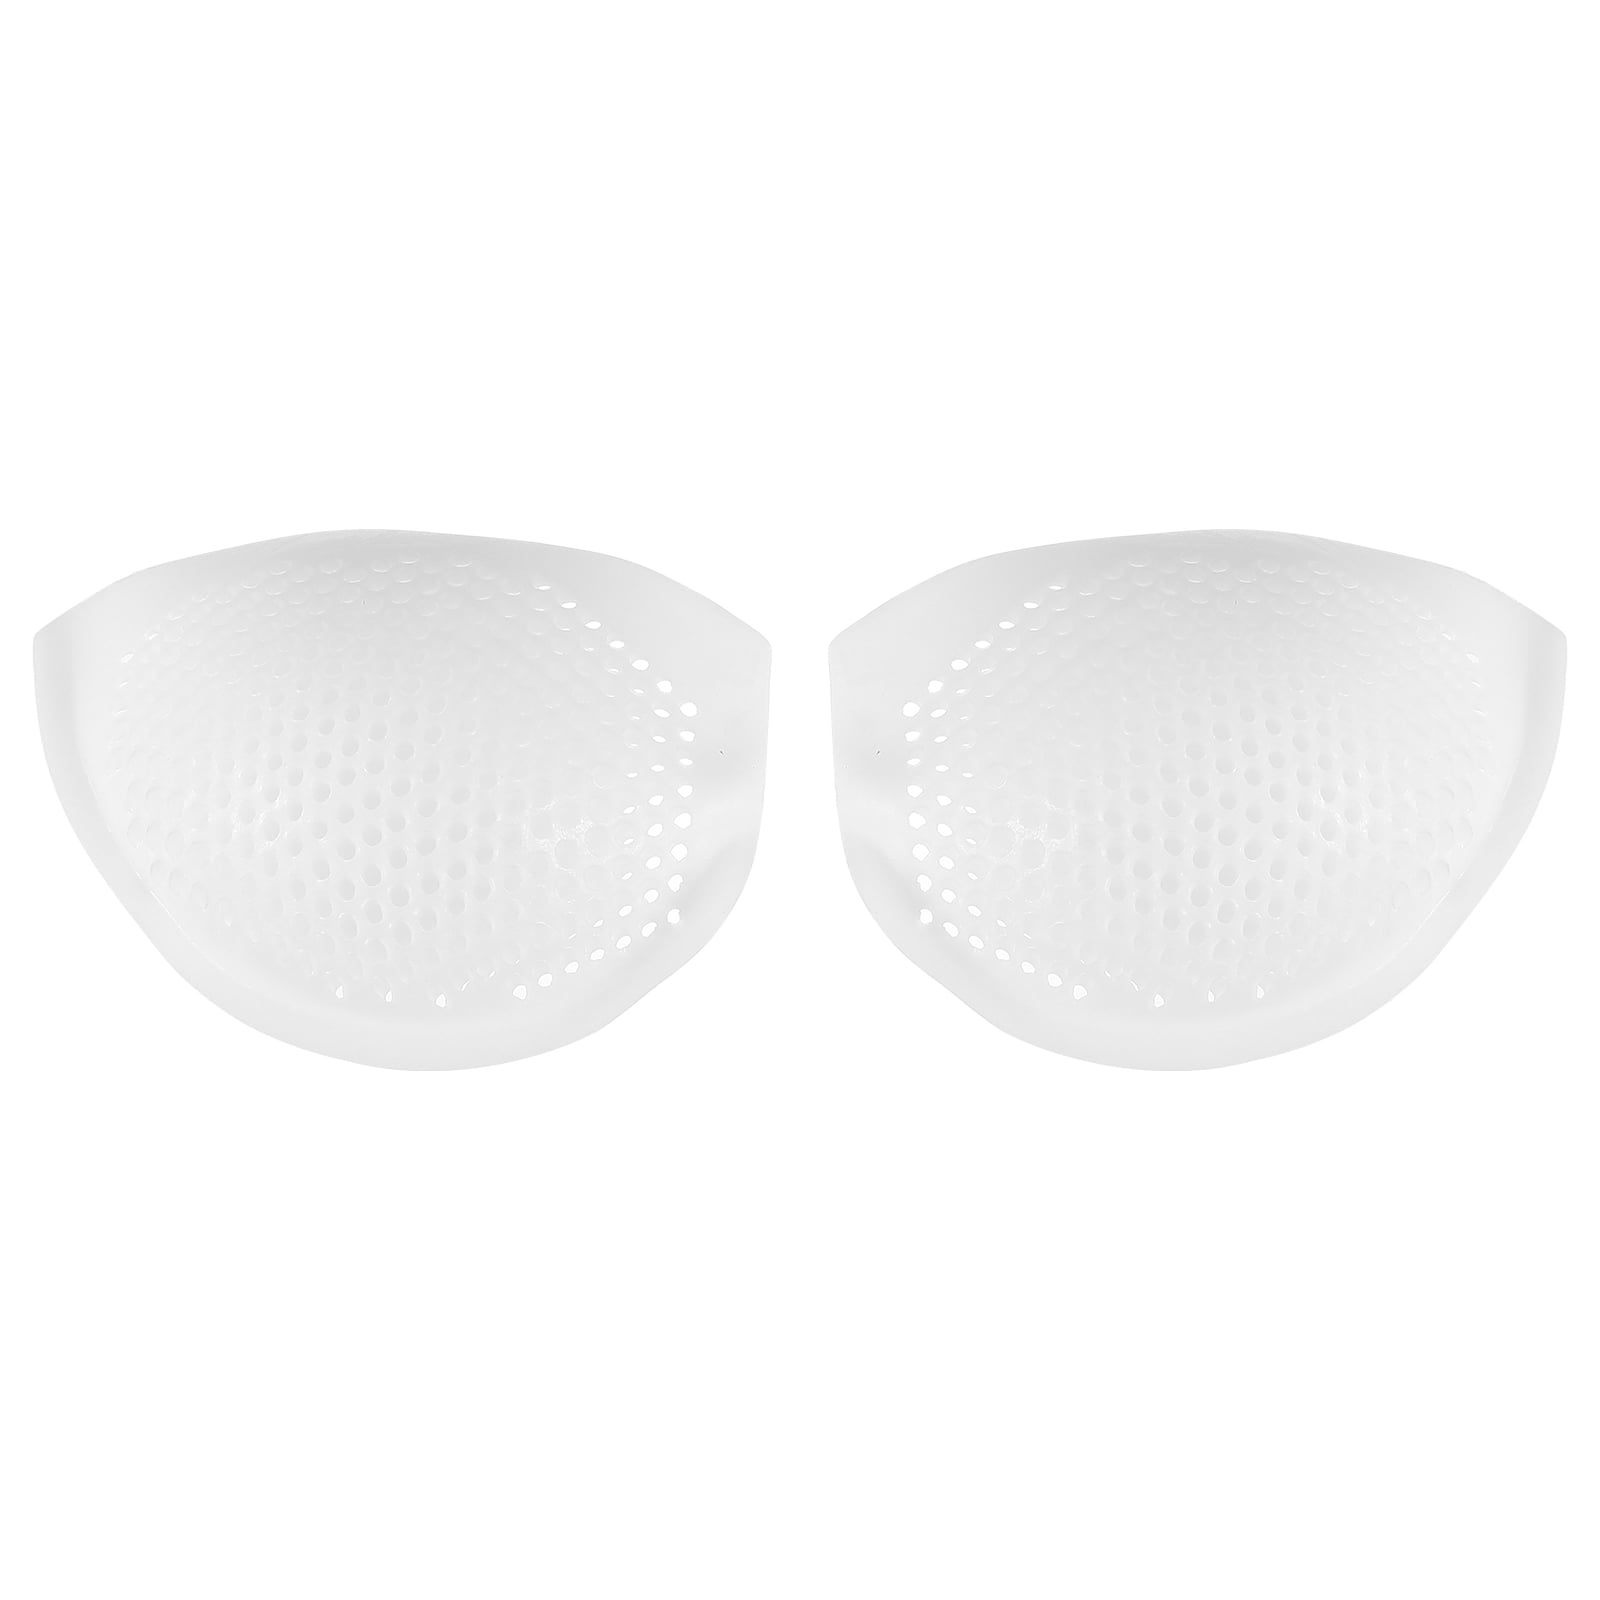 1 Pair Silicone Bra Inserts Pads Breathable Breast Enhancers Inserts ...